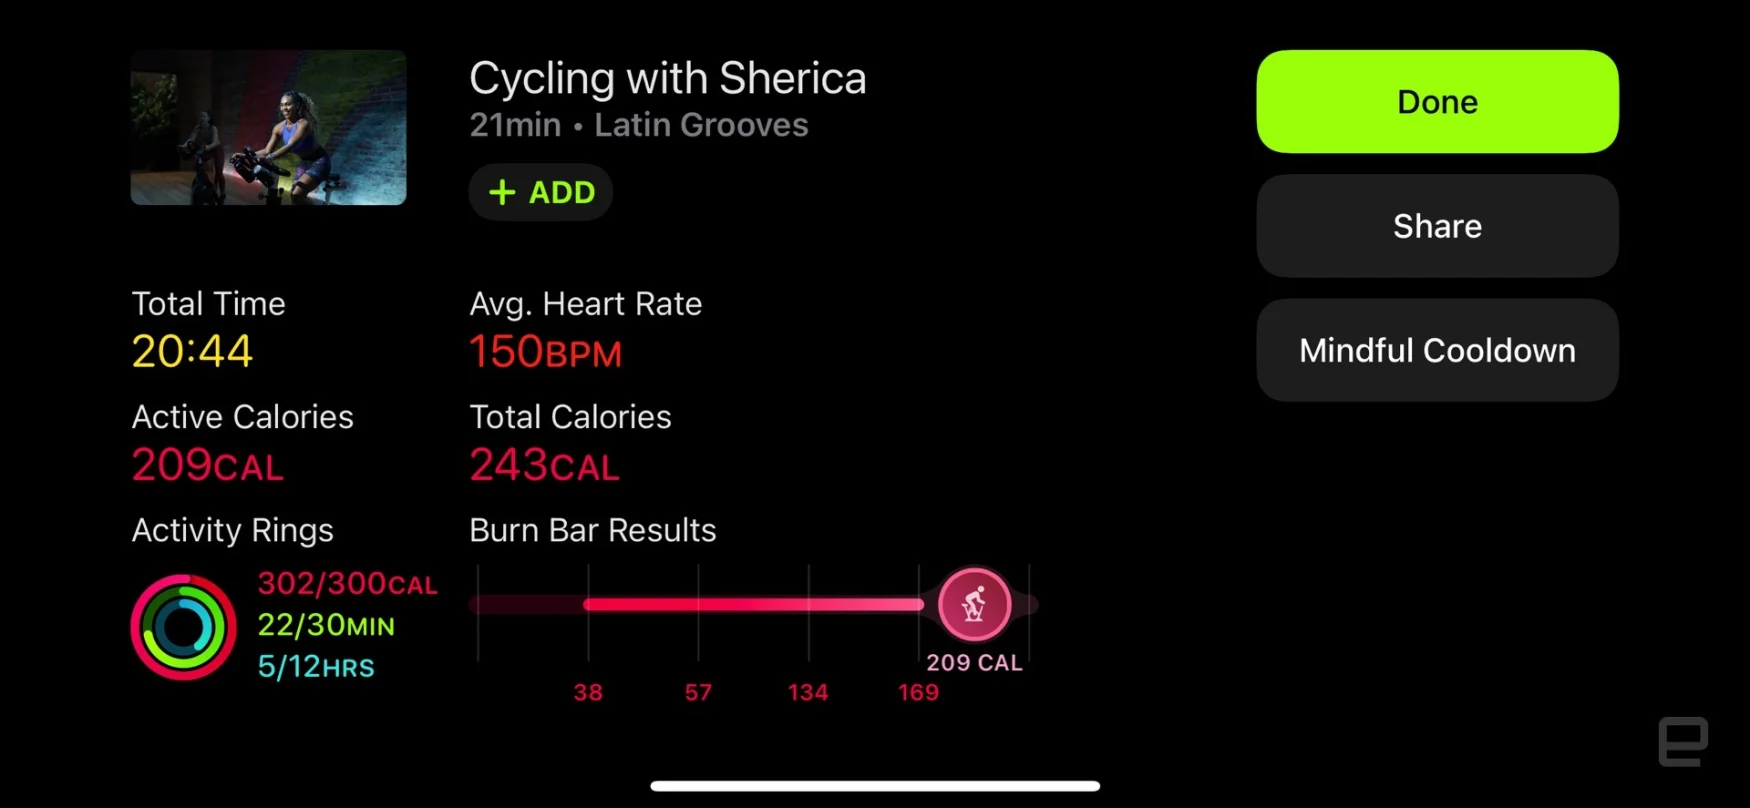 Apple Fitness+ cycling workout summary